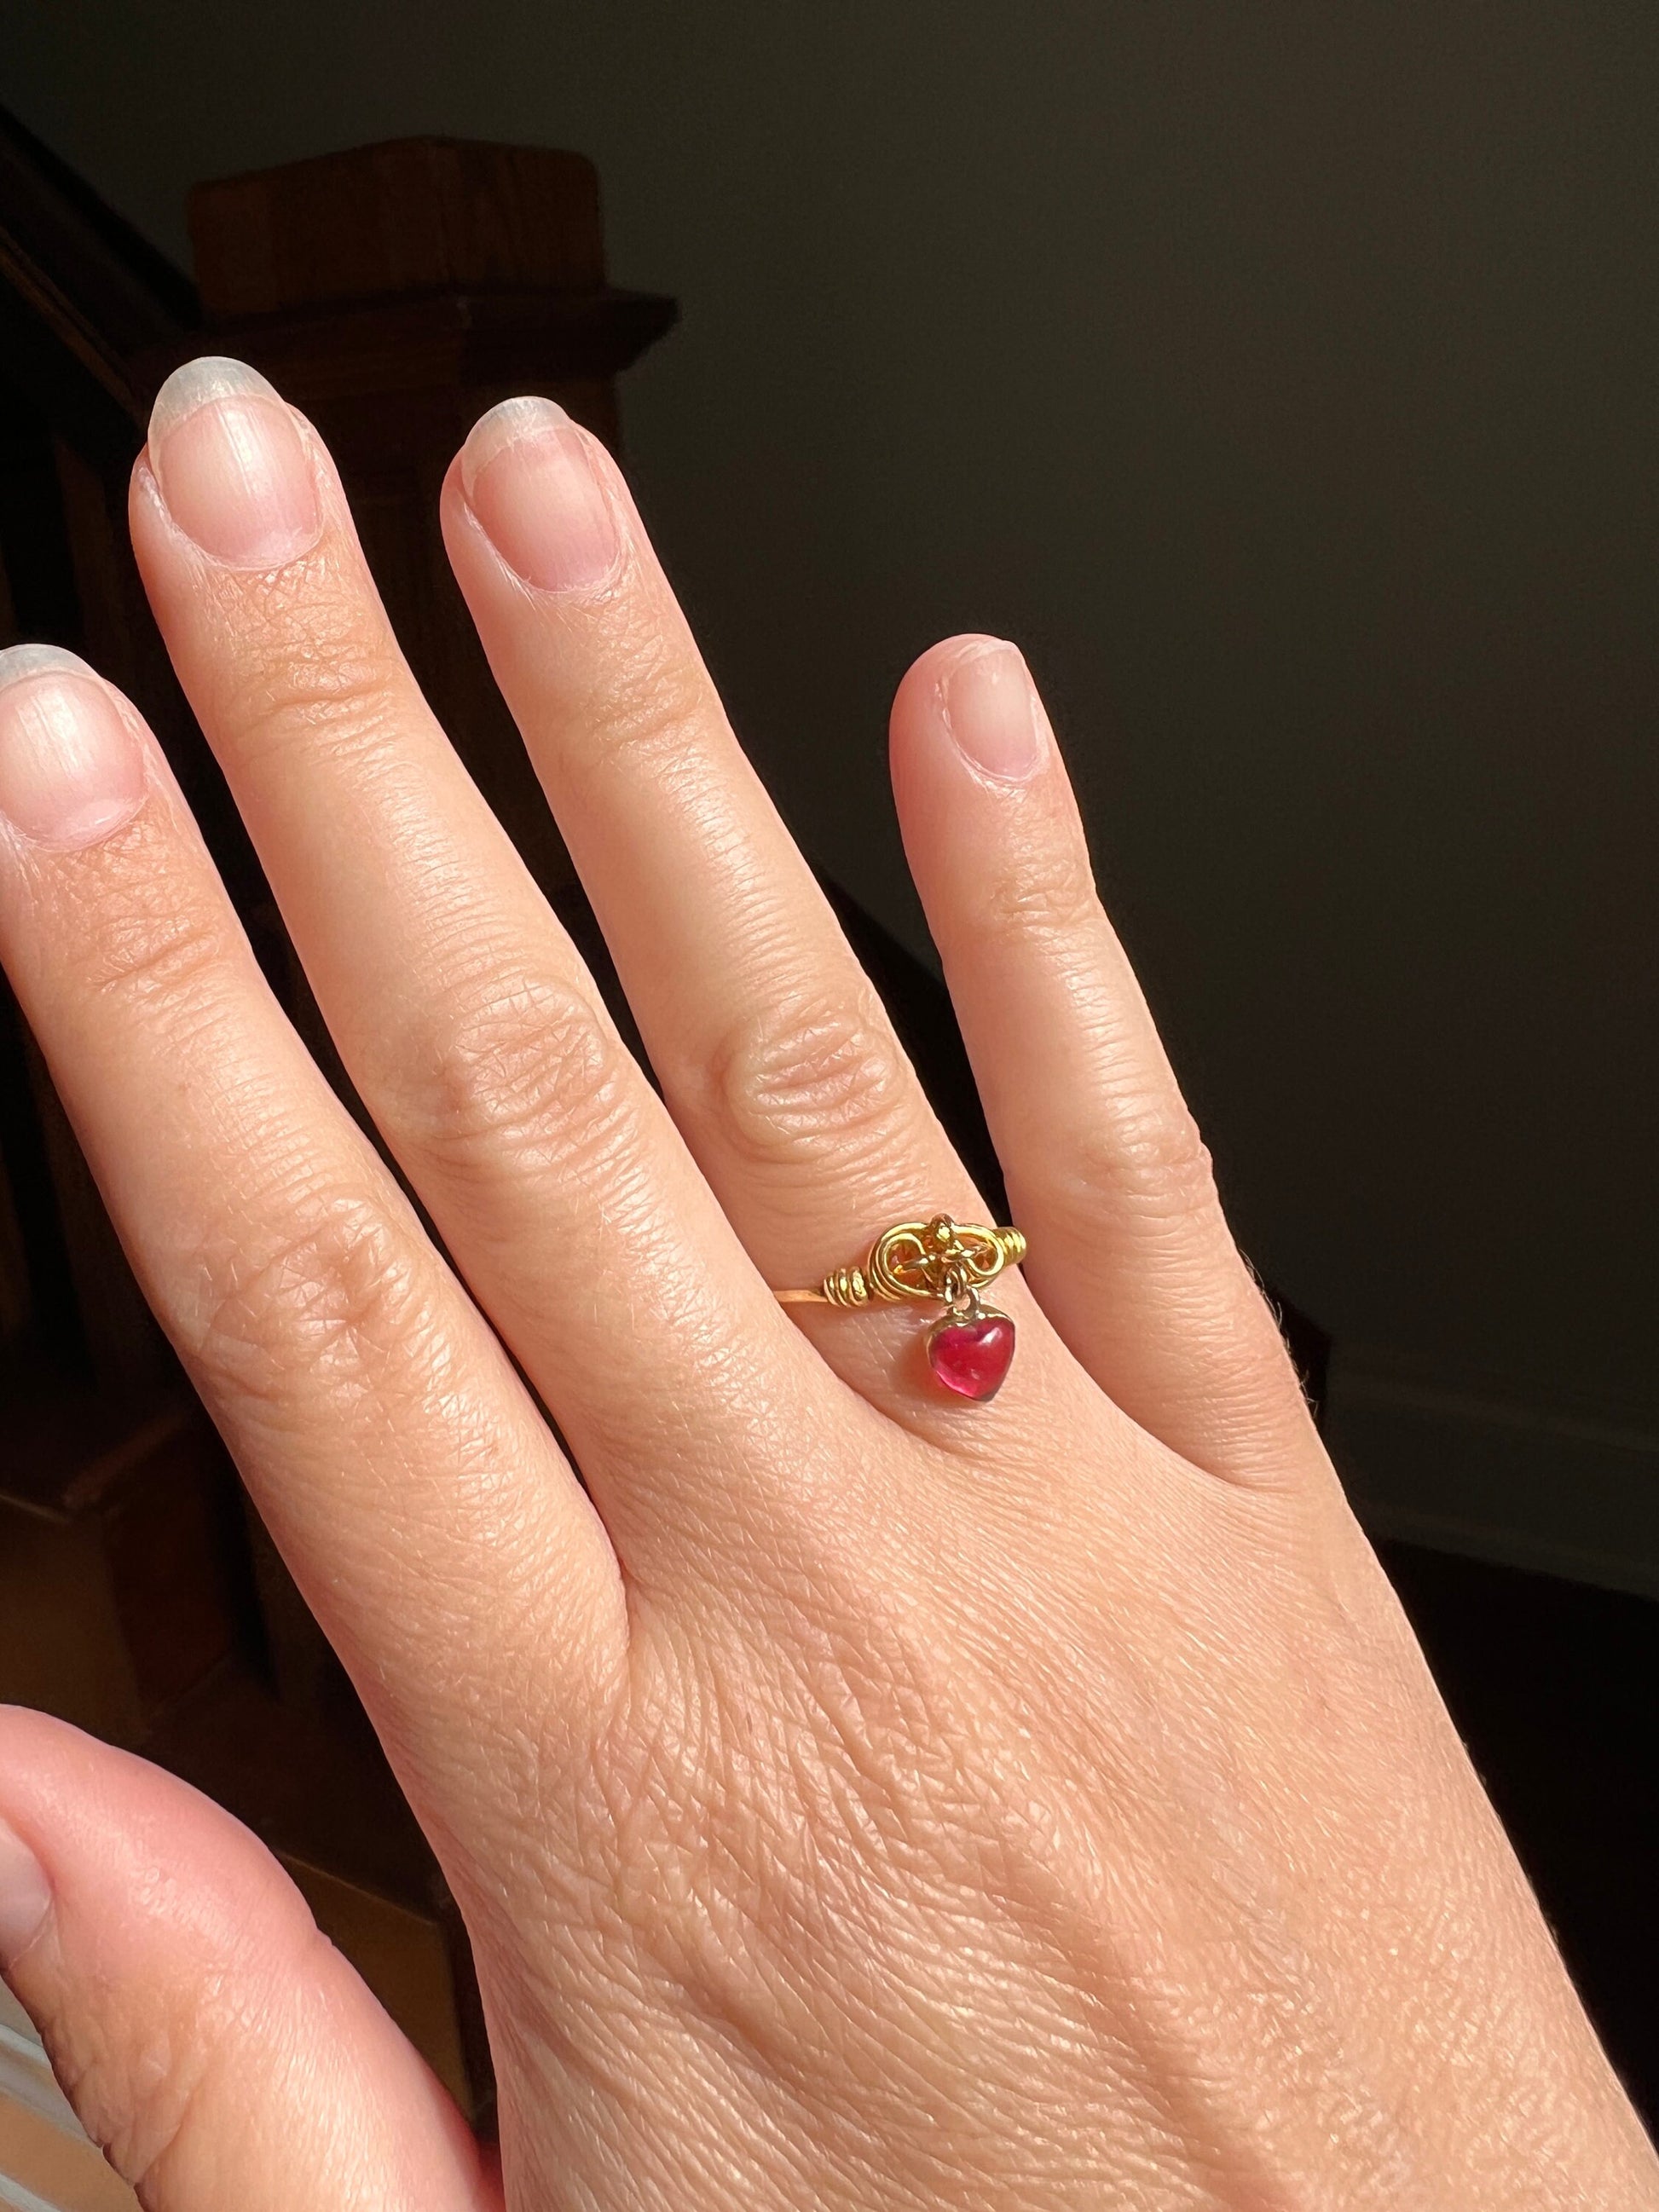 Original VICTORIAN Lover's Knot Dangling HEART Charm RING 14k Gold Pink Ruby Paste Dangle Figural Romantic Gift Cabochon Pinky Midi Stacker